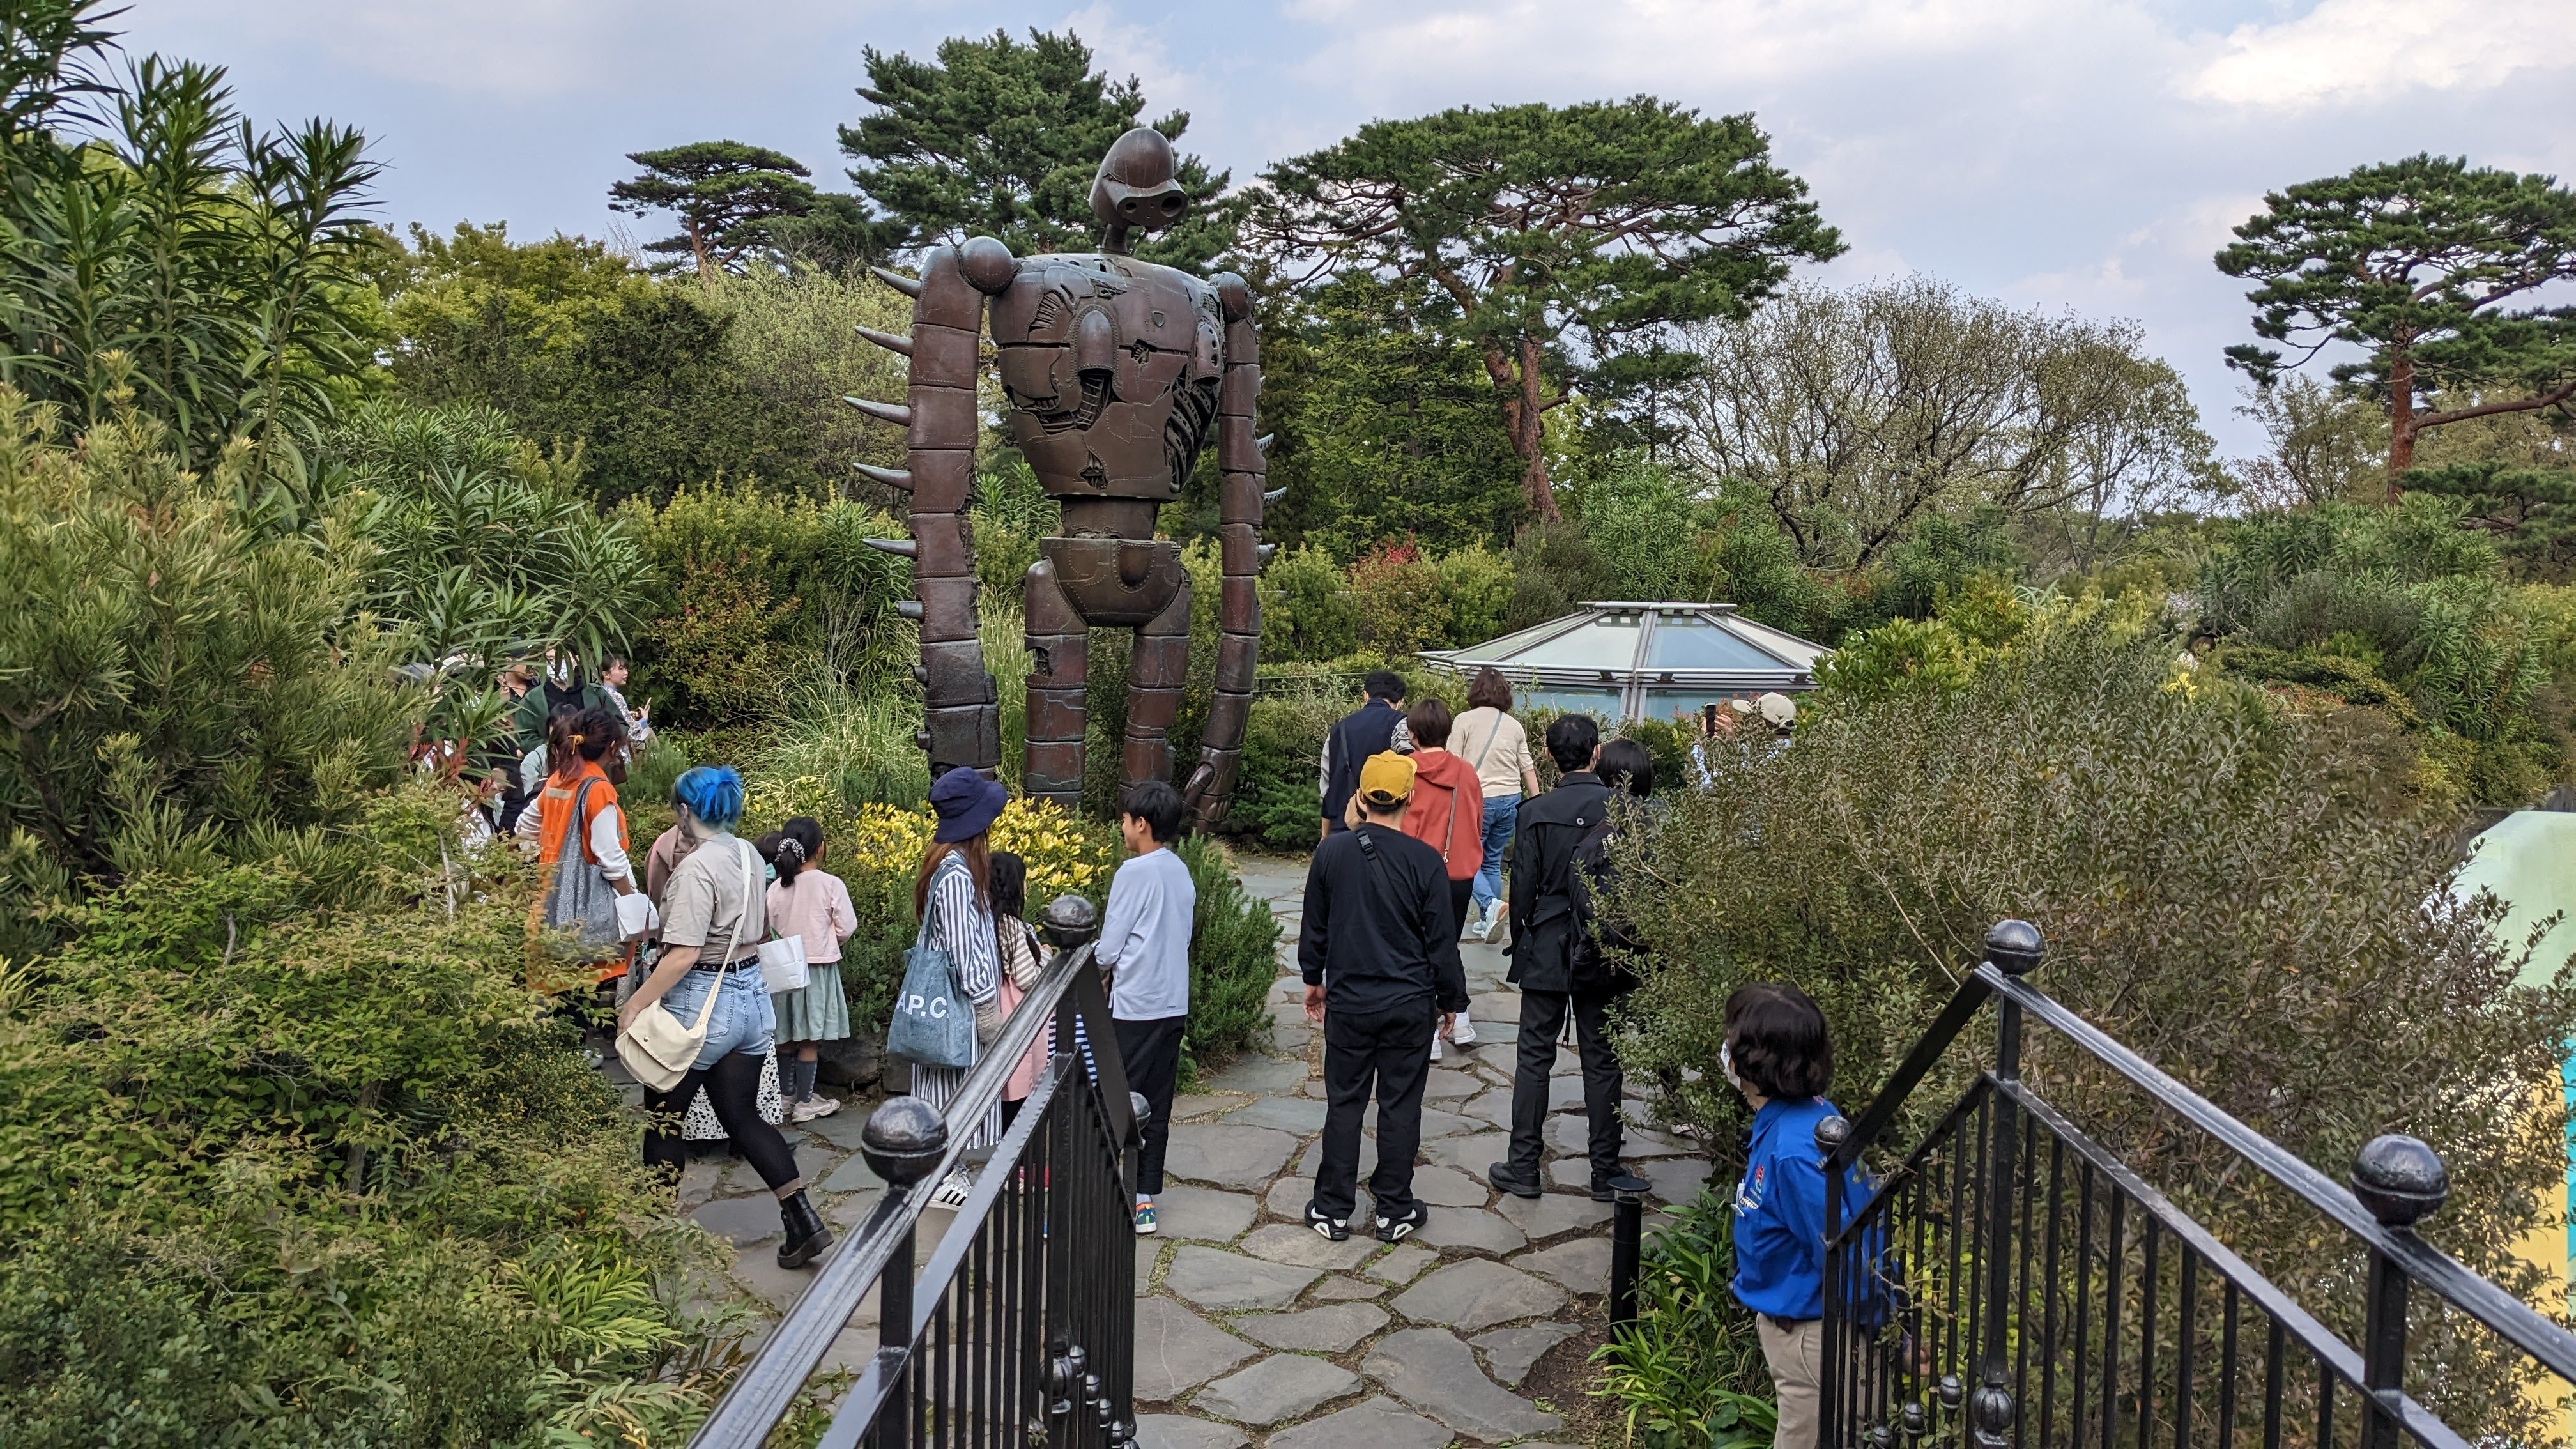 Rooftop garden of Ghibli Museum (photos are not allowed inside)